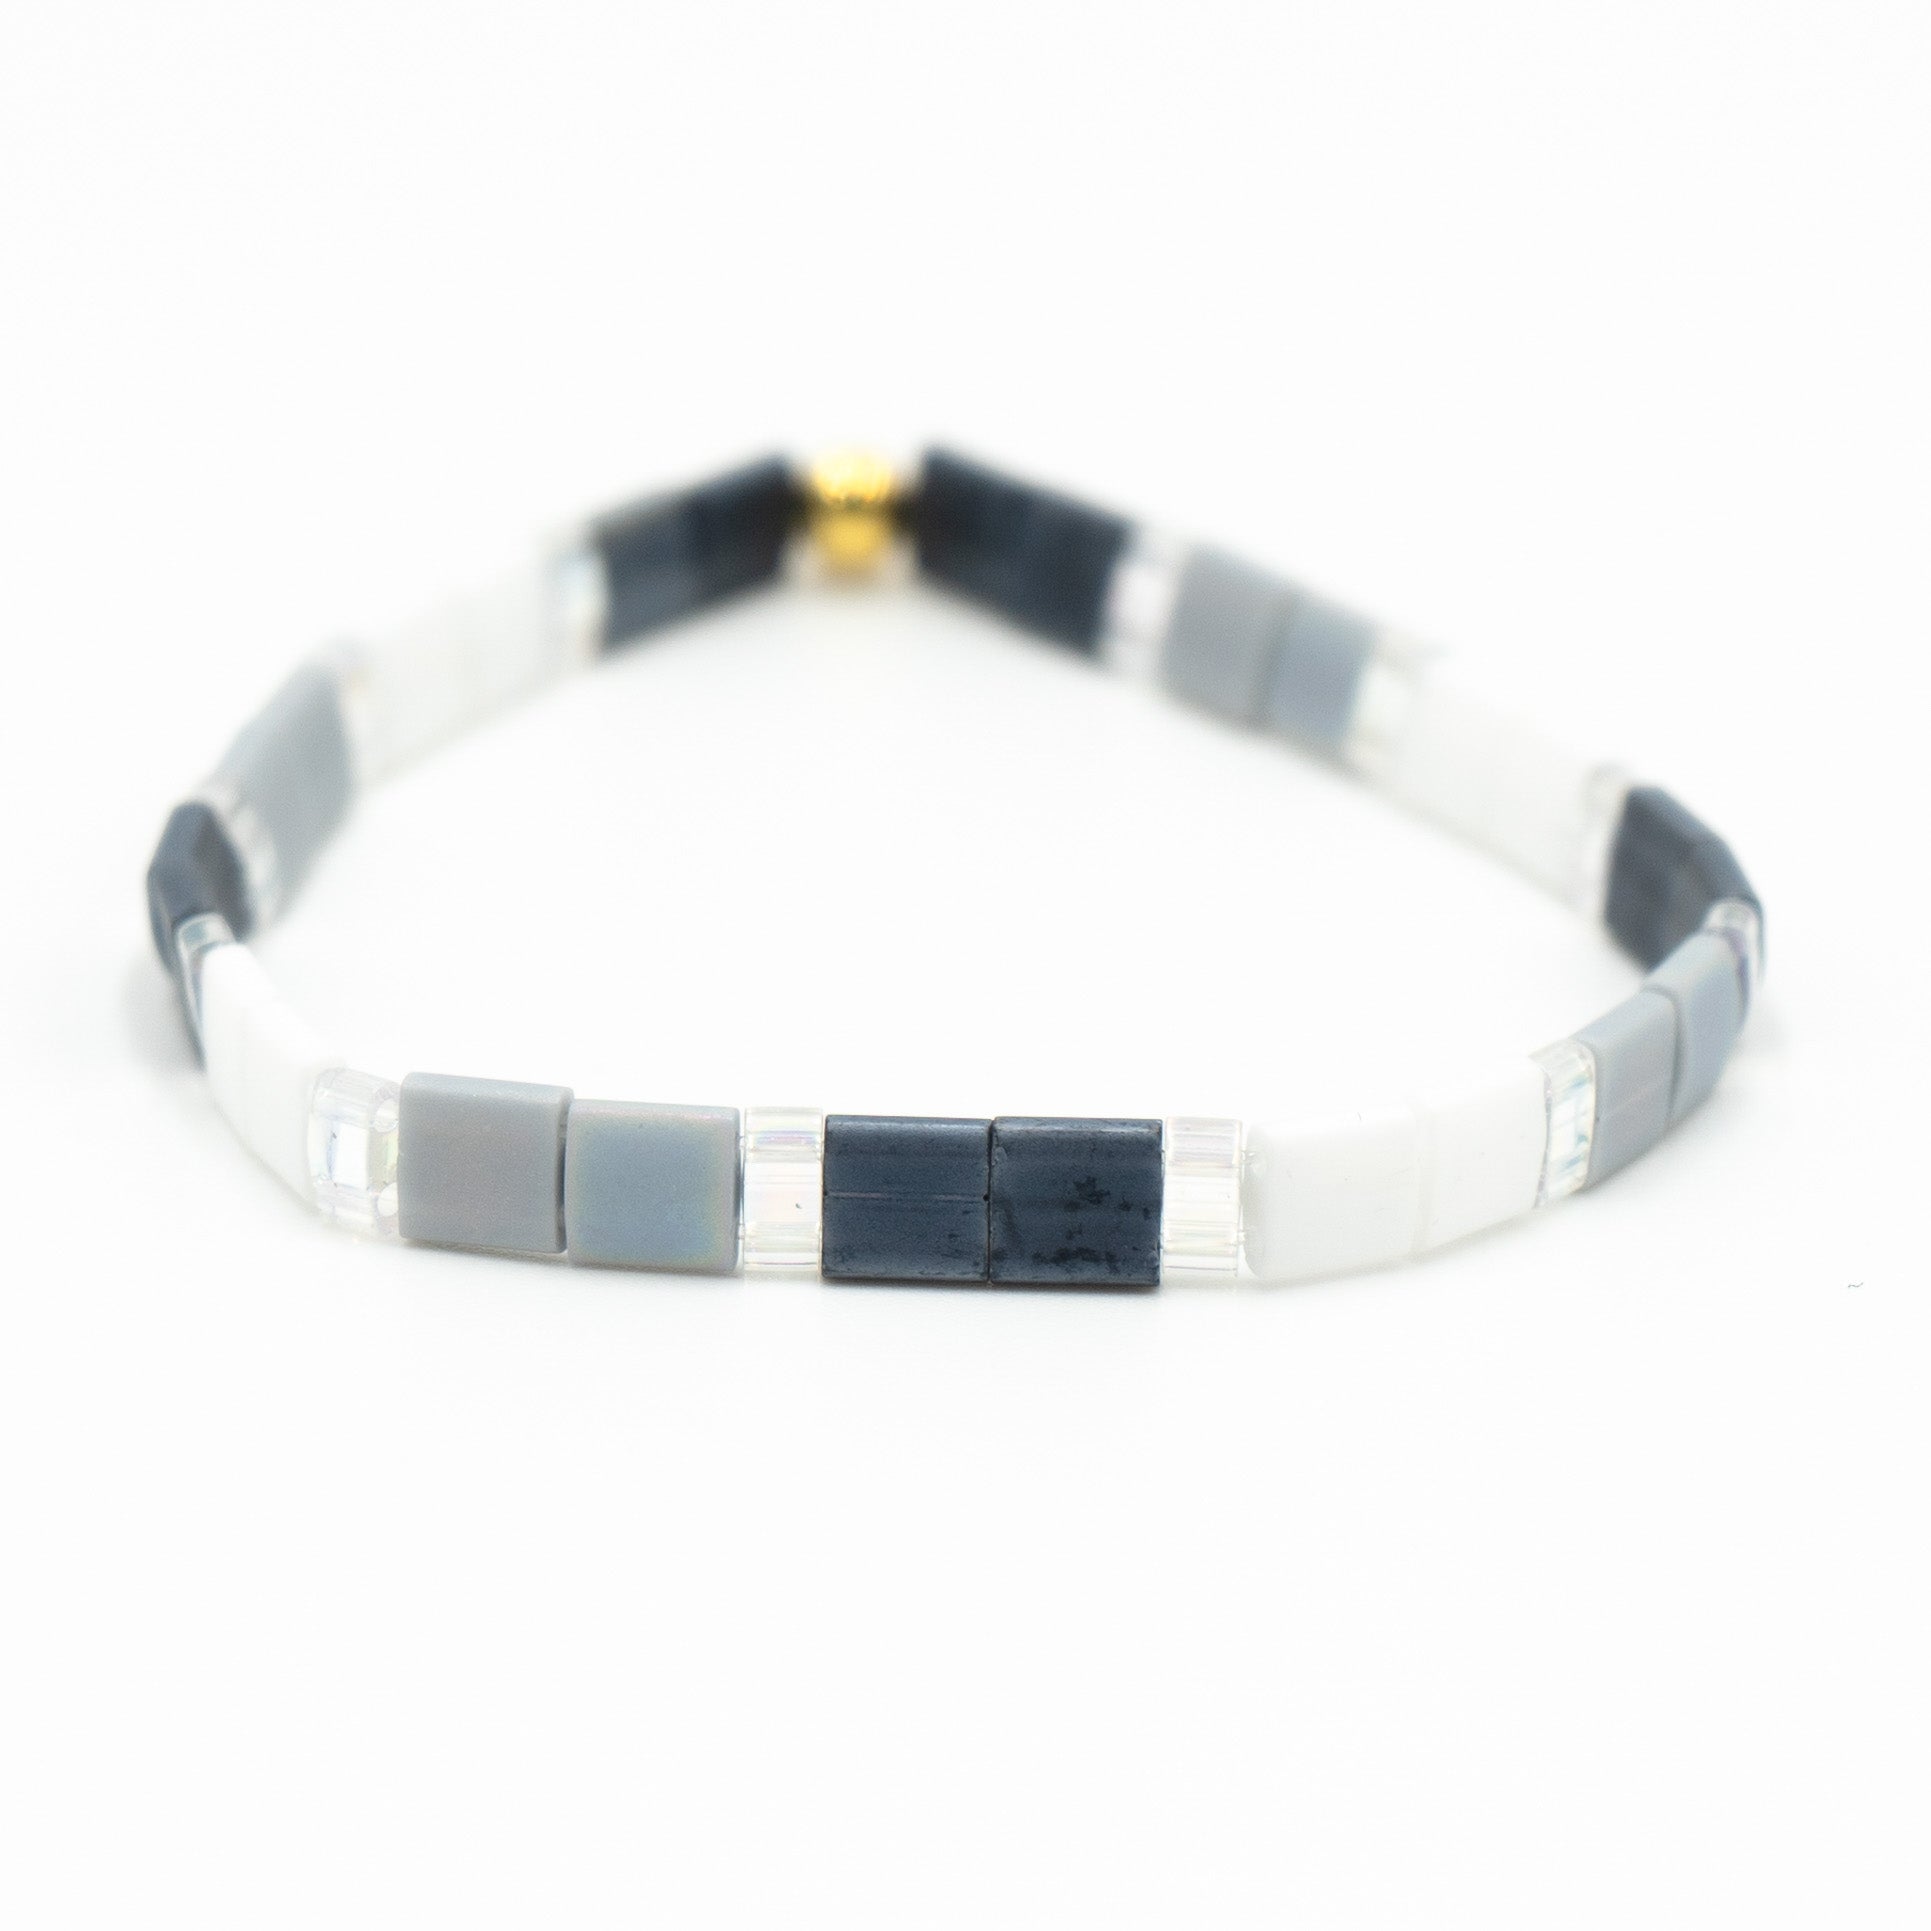 a black and white bracelet with a gold clasp